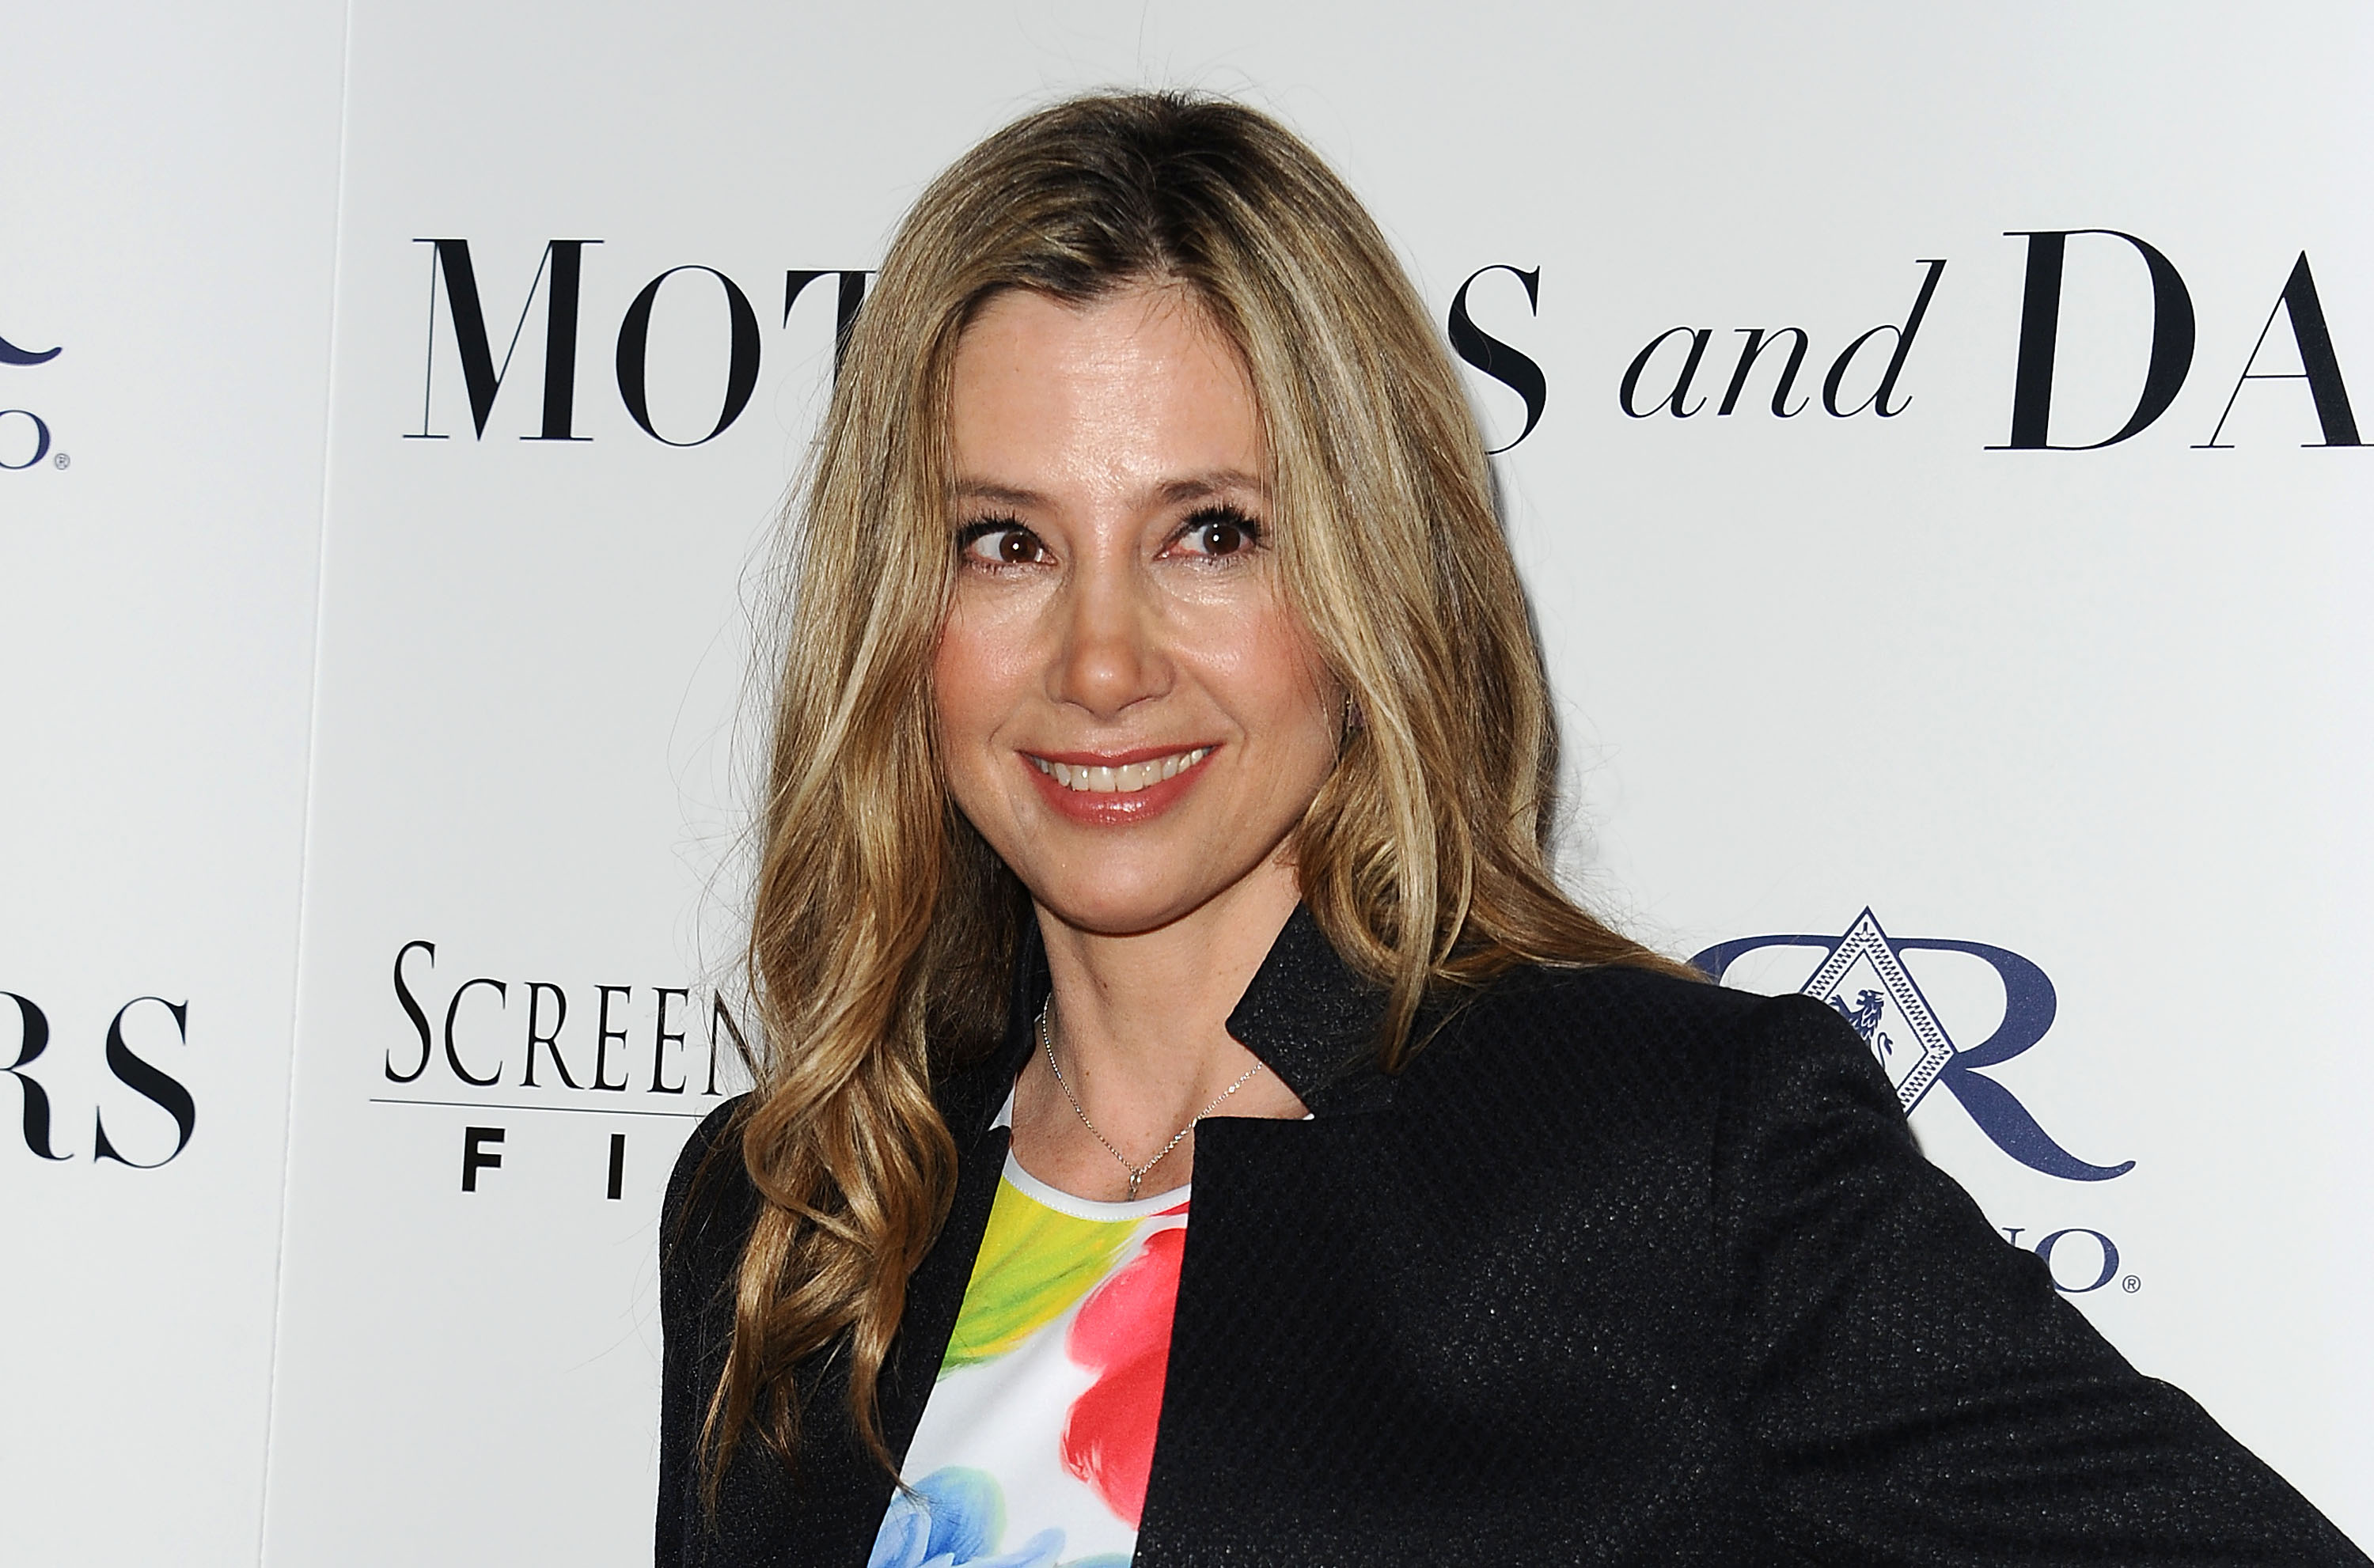 Actress Mira Sorvino attends the premiere of "Mothers and Daughters" at The London on April 28, 2016 in West Hollywood, California. (Jason LaVeris—FilmMagic)